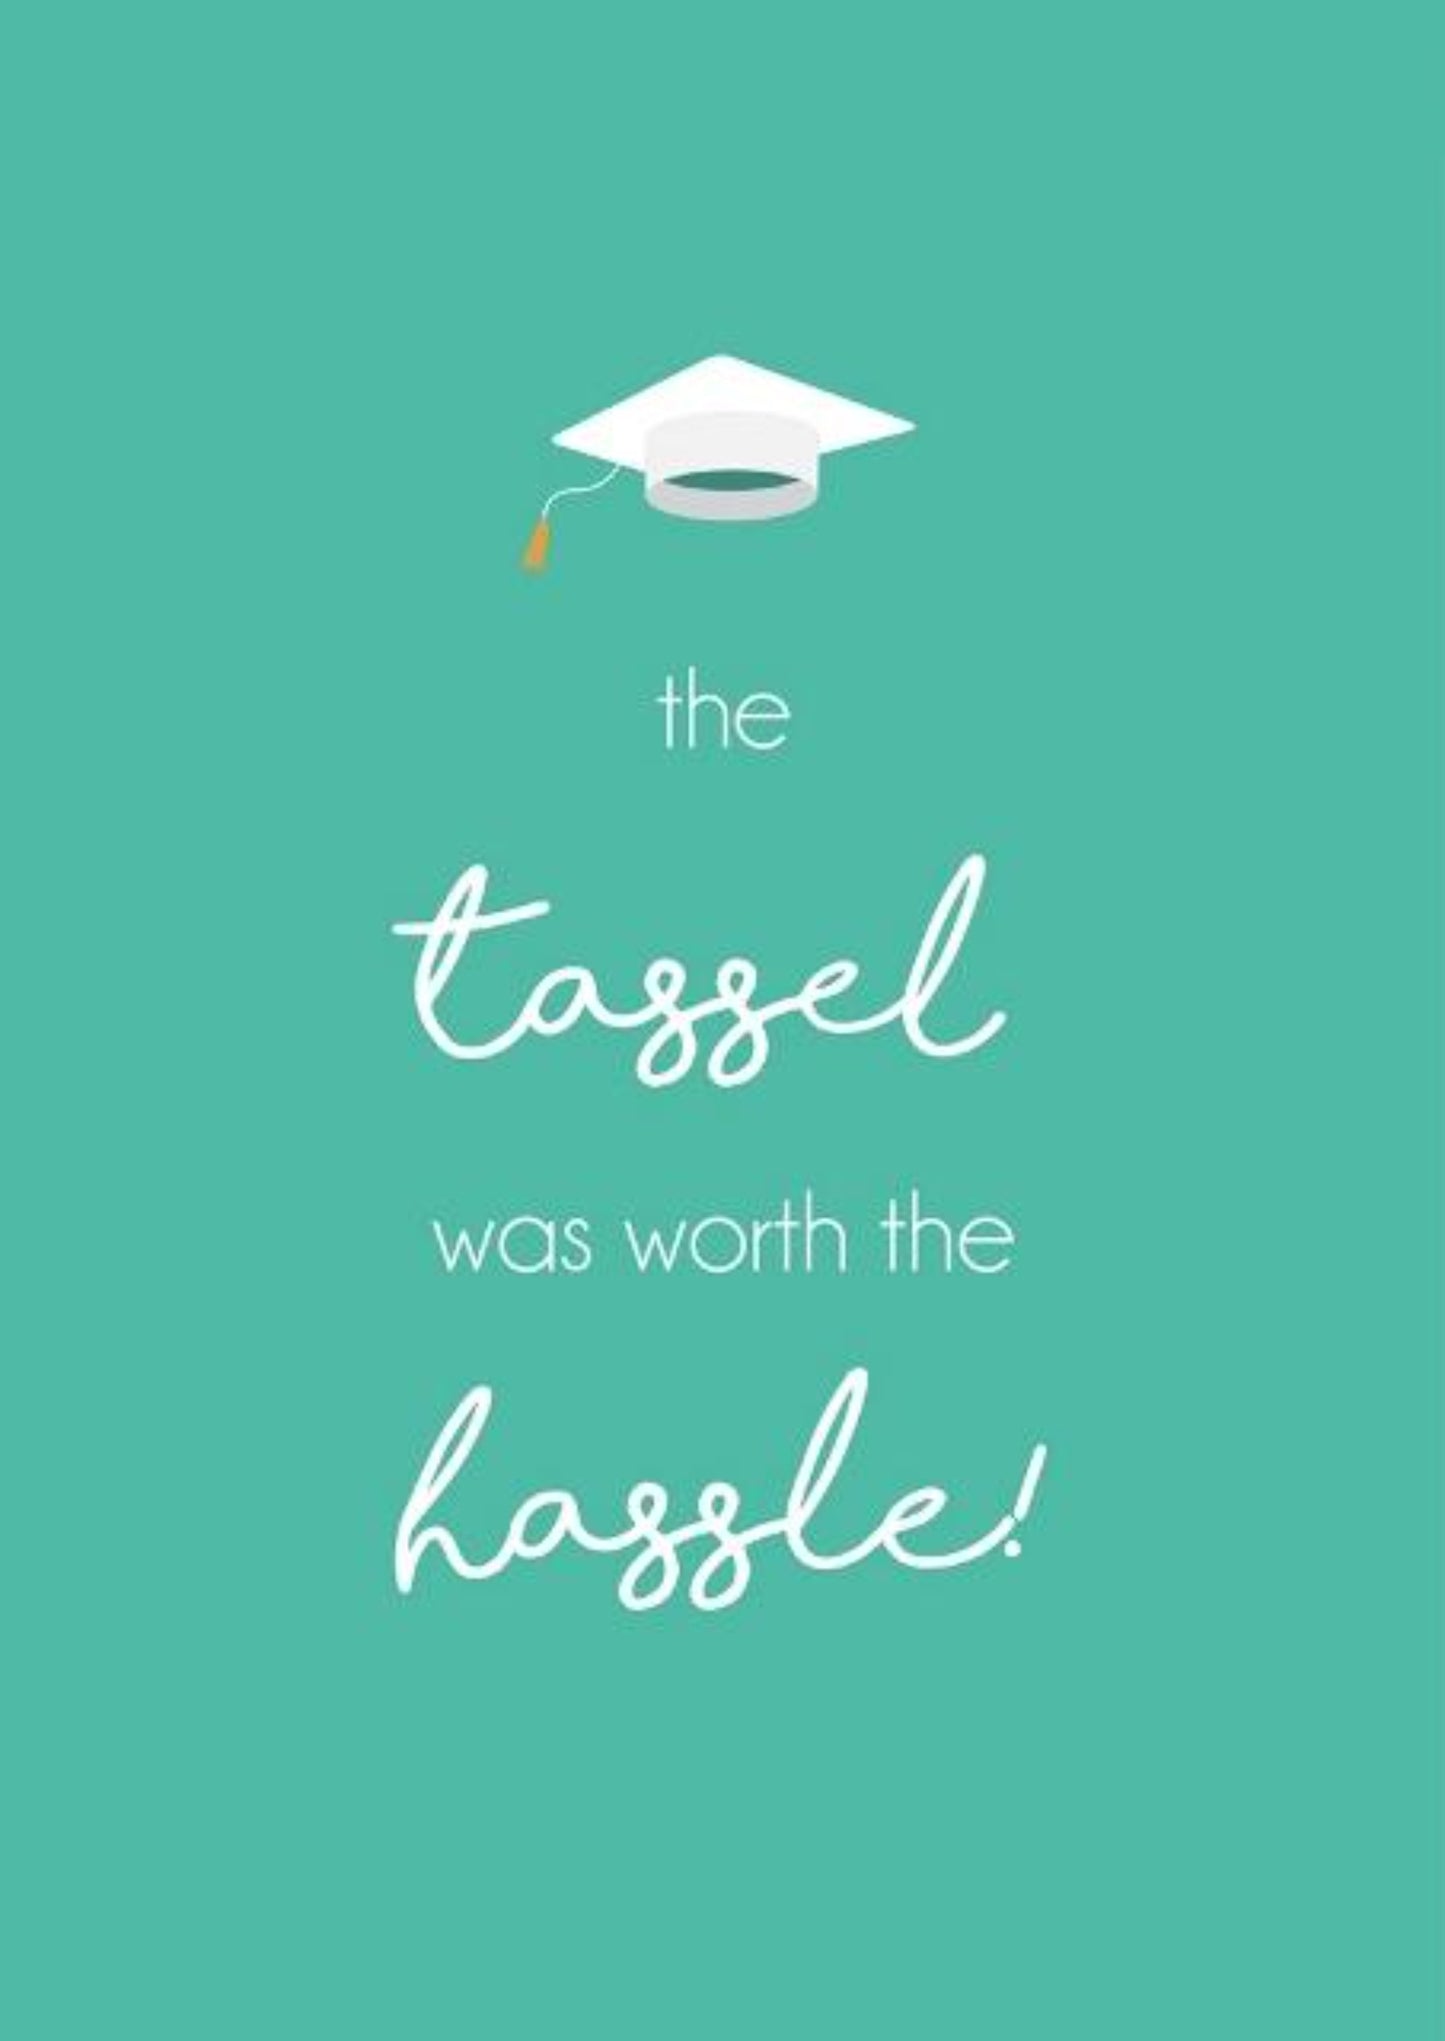 The Tassel Was Worth The Hassle!.